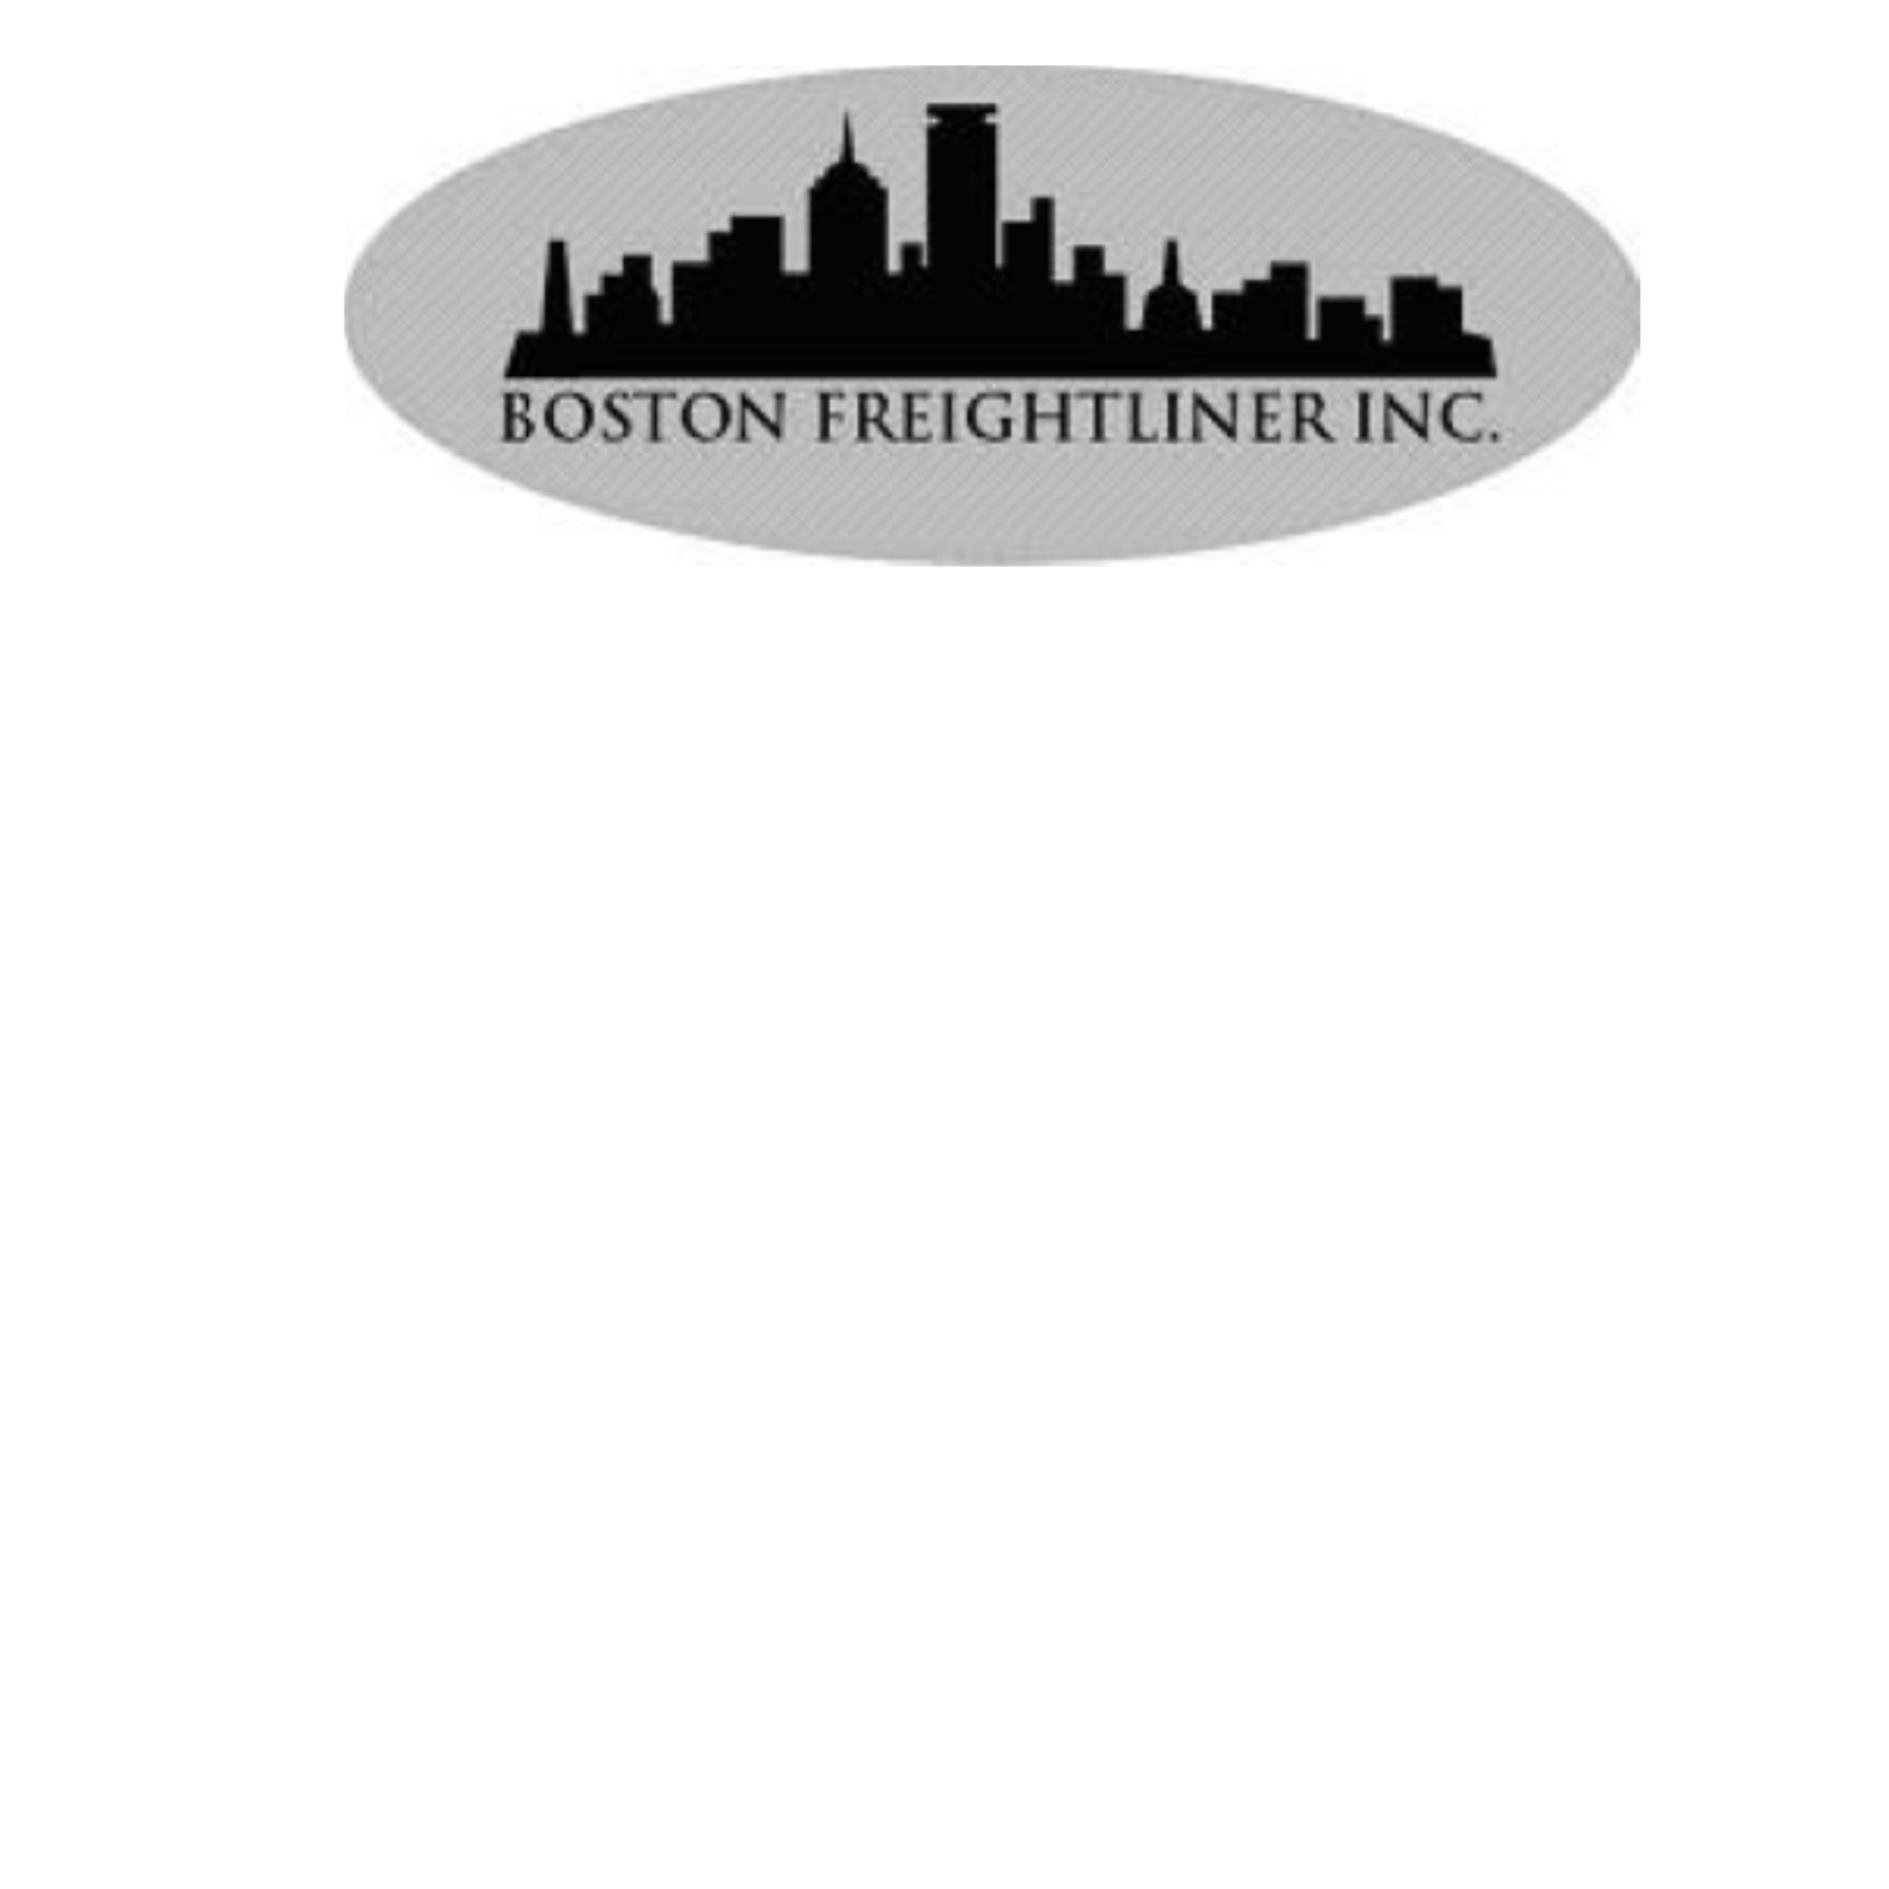 Boston Freightliner, together with Freightliner Corporation and subsidiaries, is part of North America's leading retailers of new and used trucks. 

Our Compa